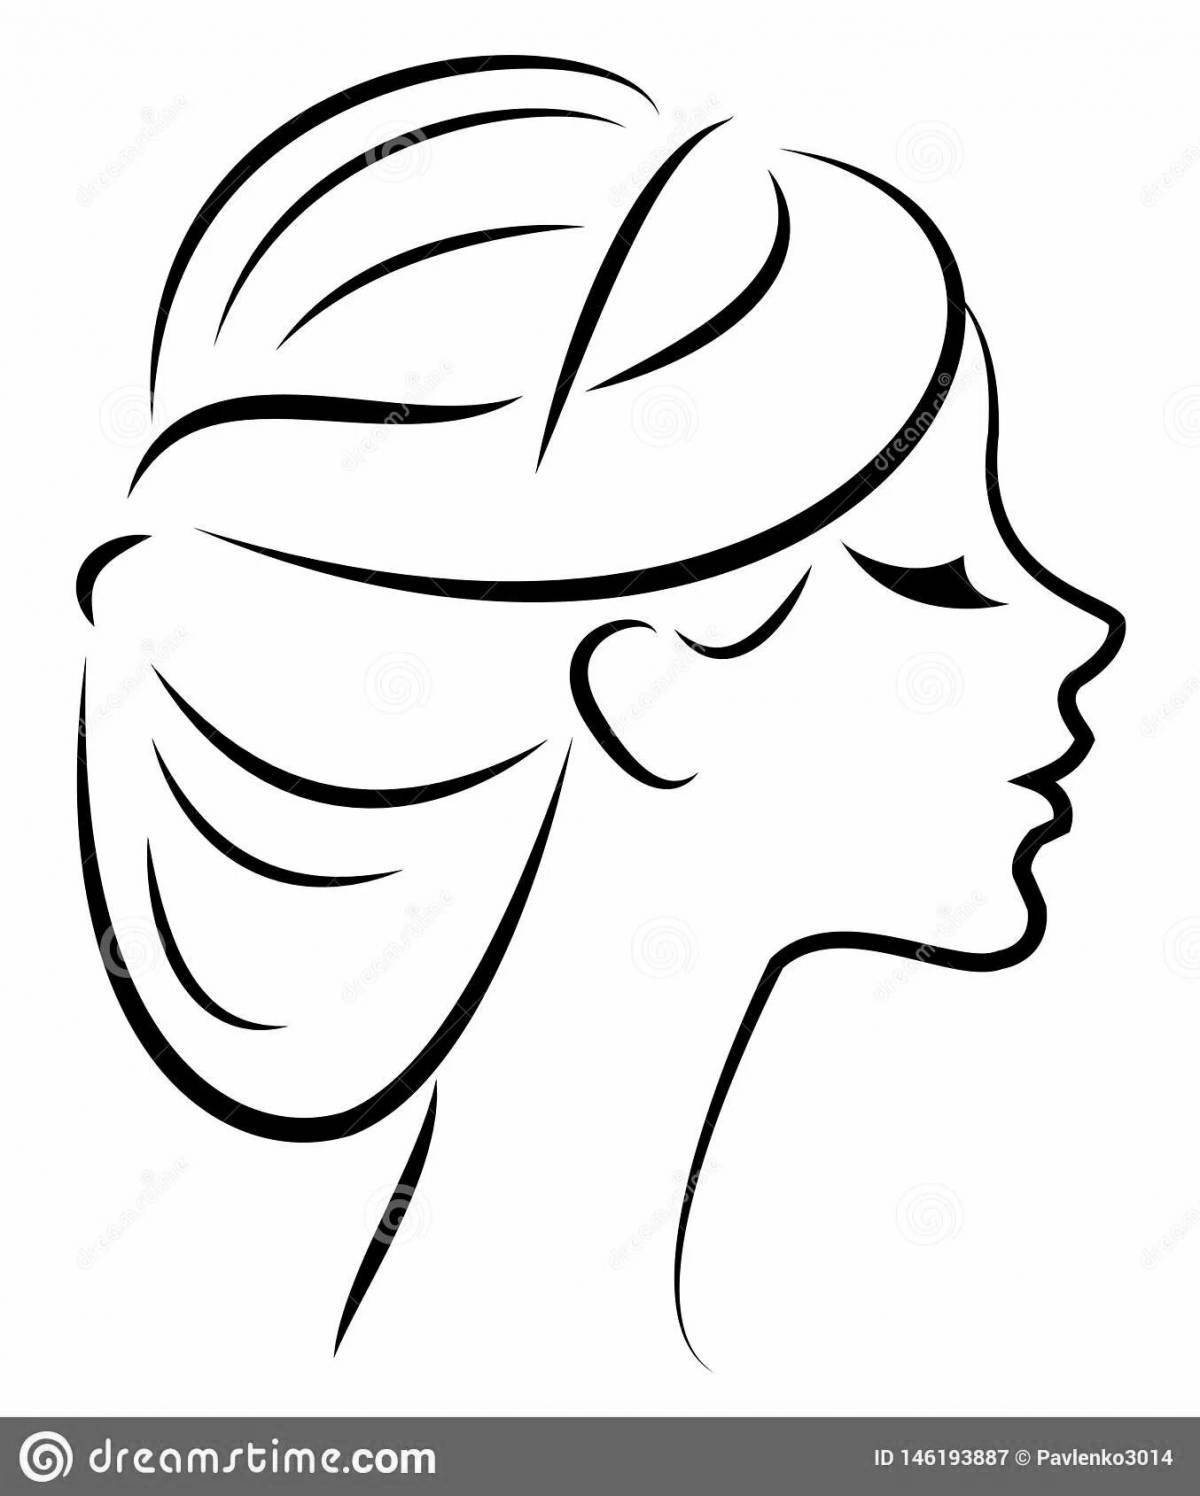 Face coloring page with relaxed profile